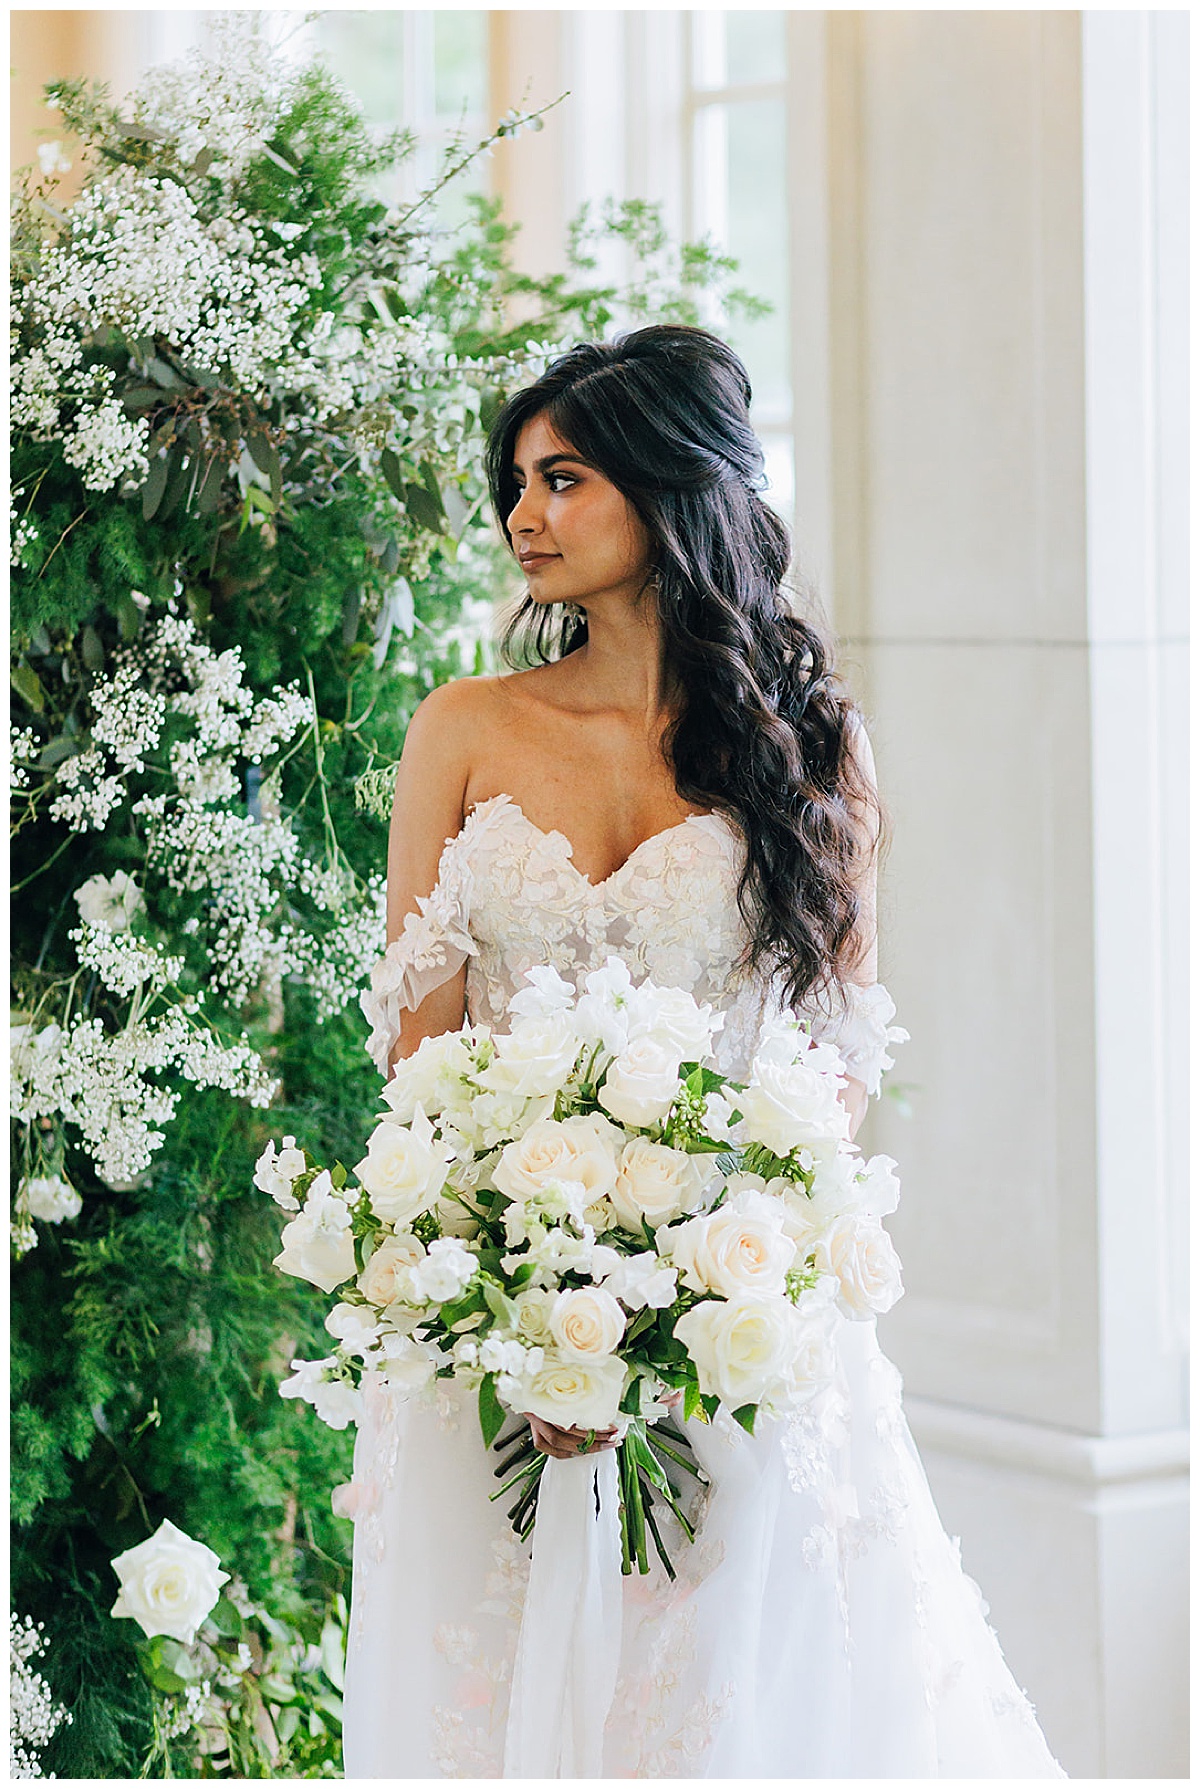 Adult holds bridal bouquet and smiles big for Kayla Bouren Photography